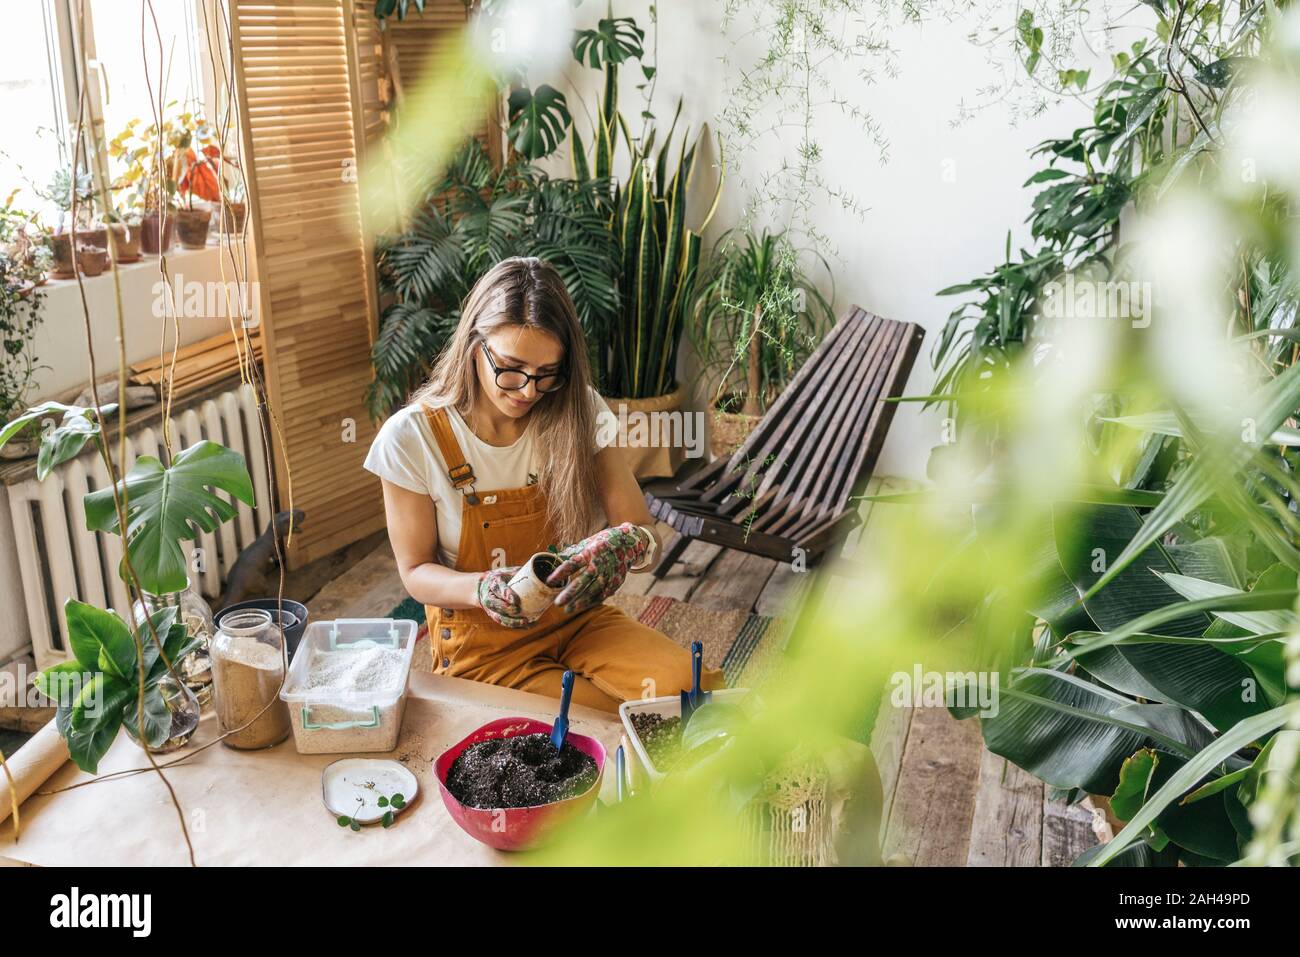 Young woman working with soil in a small gardening shop Stock Photo